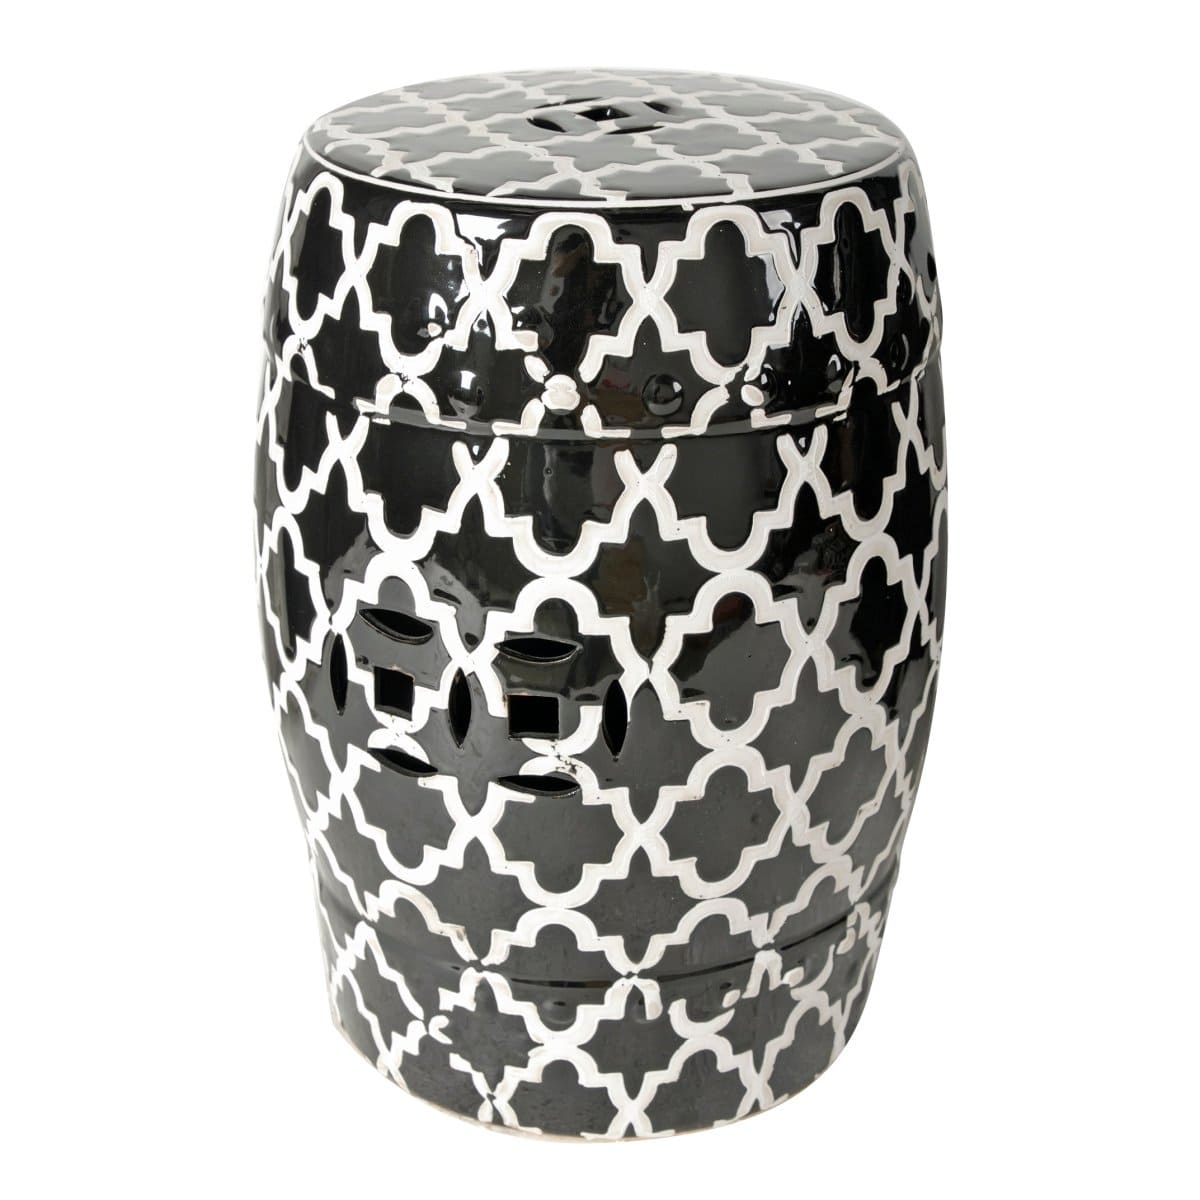 #1 Finley Indoor/Outdoor Patterned Stool, Black/White AB-69634 picket and rail